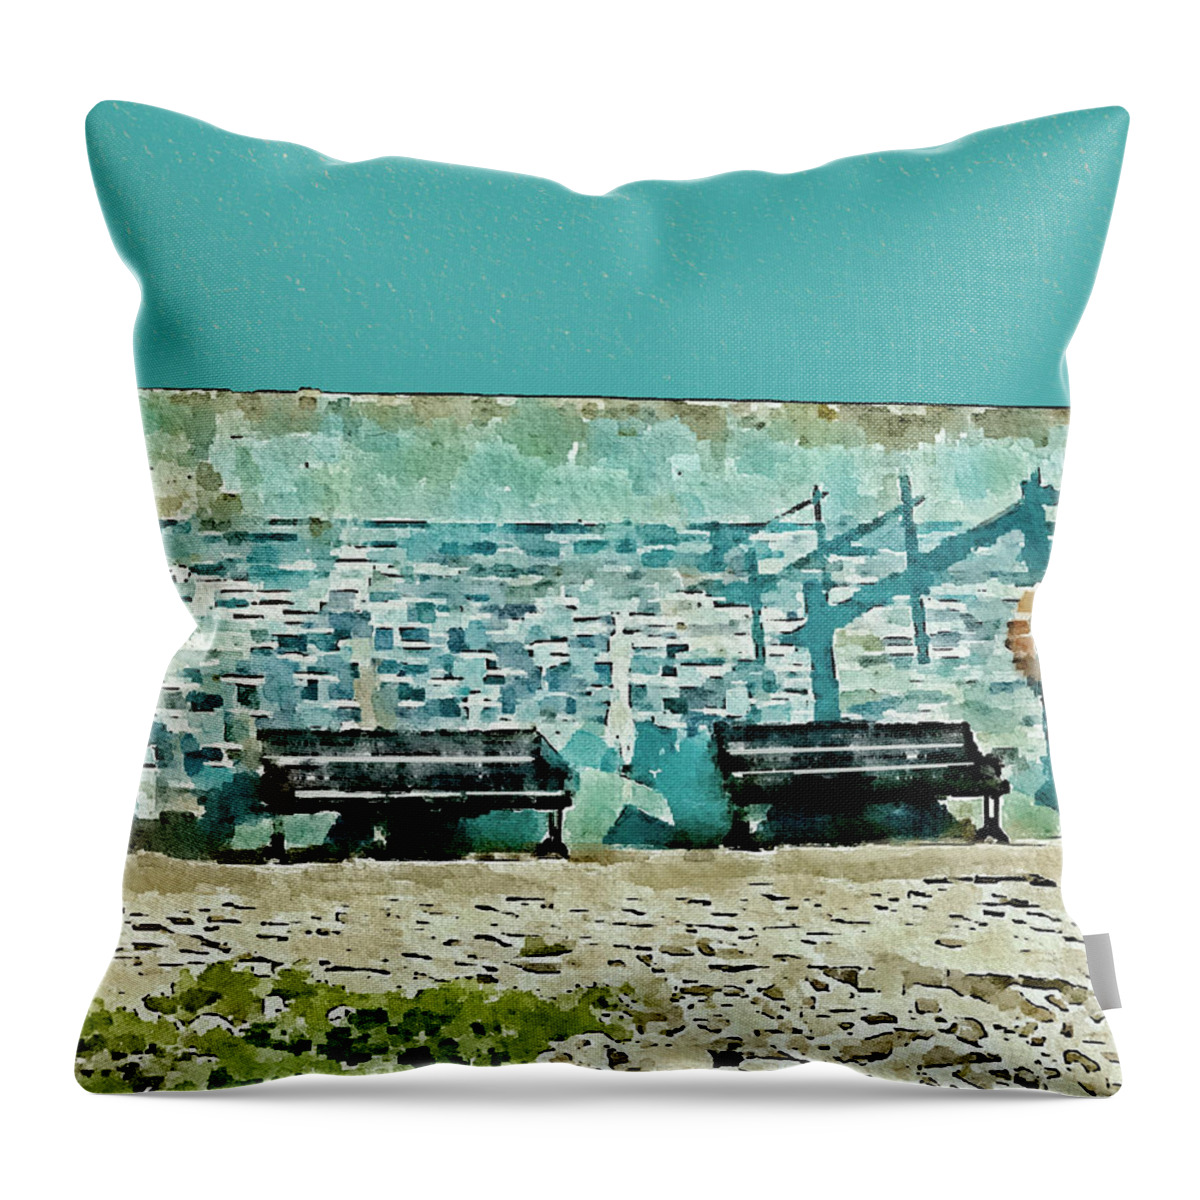 Lossiemouth Throw Pillow featuring the digital art Lossiemouth Blue Wall by John Mckenzie